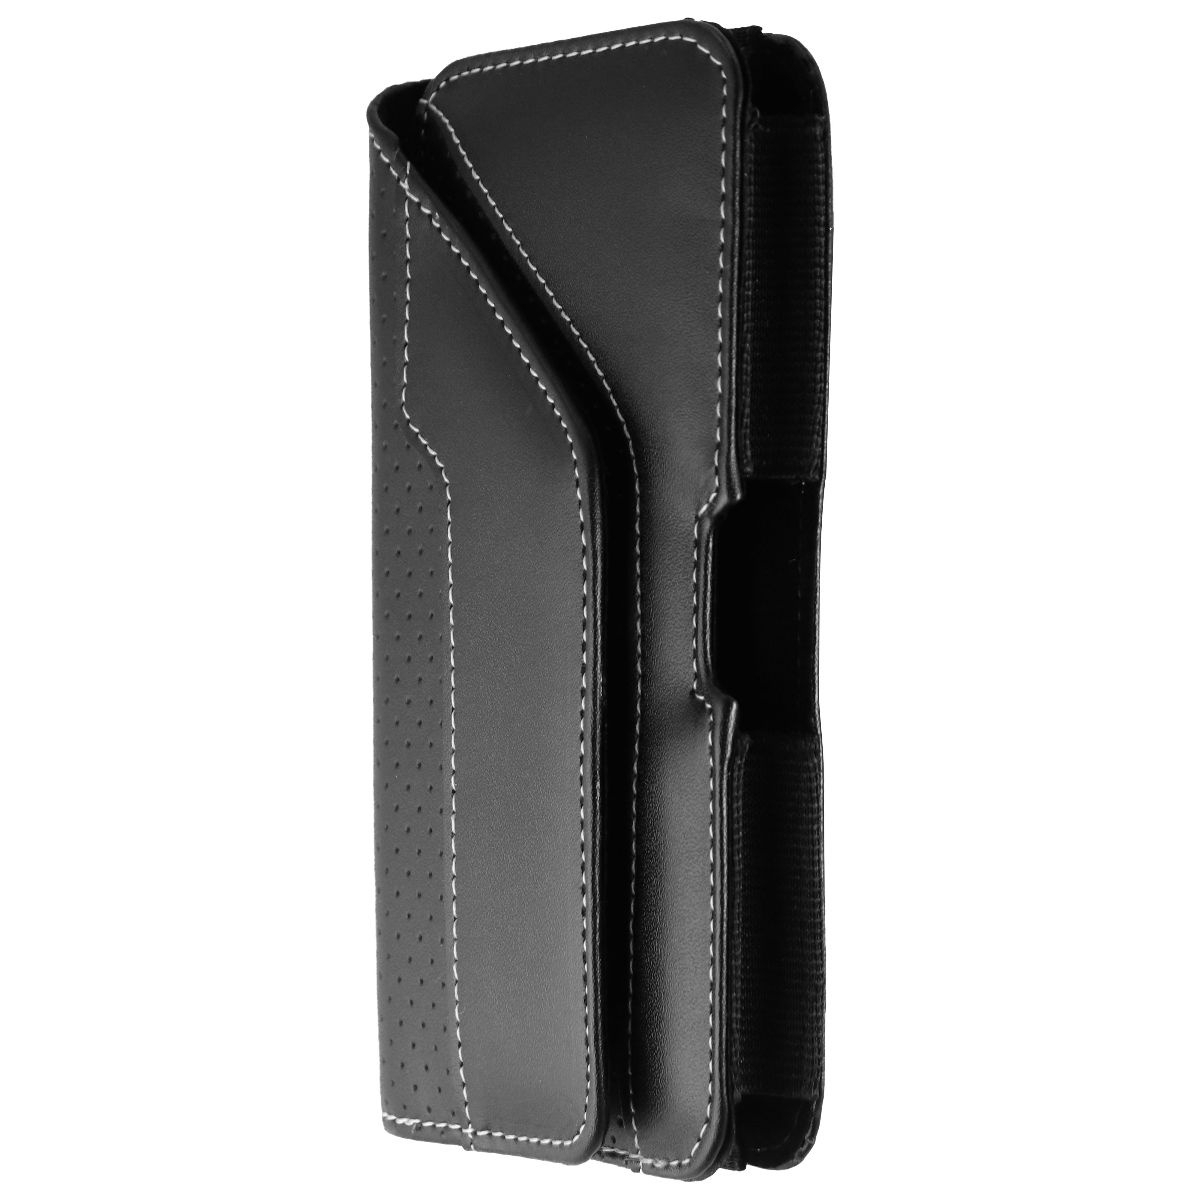 MWorks! Universal Holster Pouch Case For Up To 6-inch Smartphones - Black/White